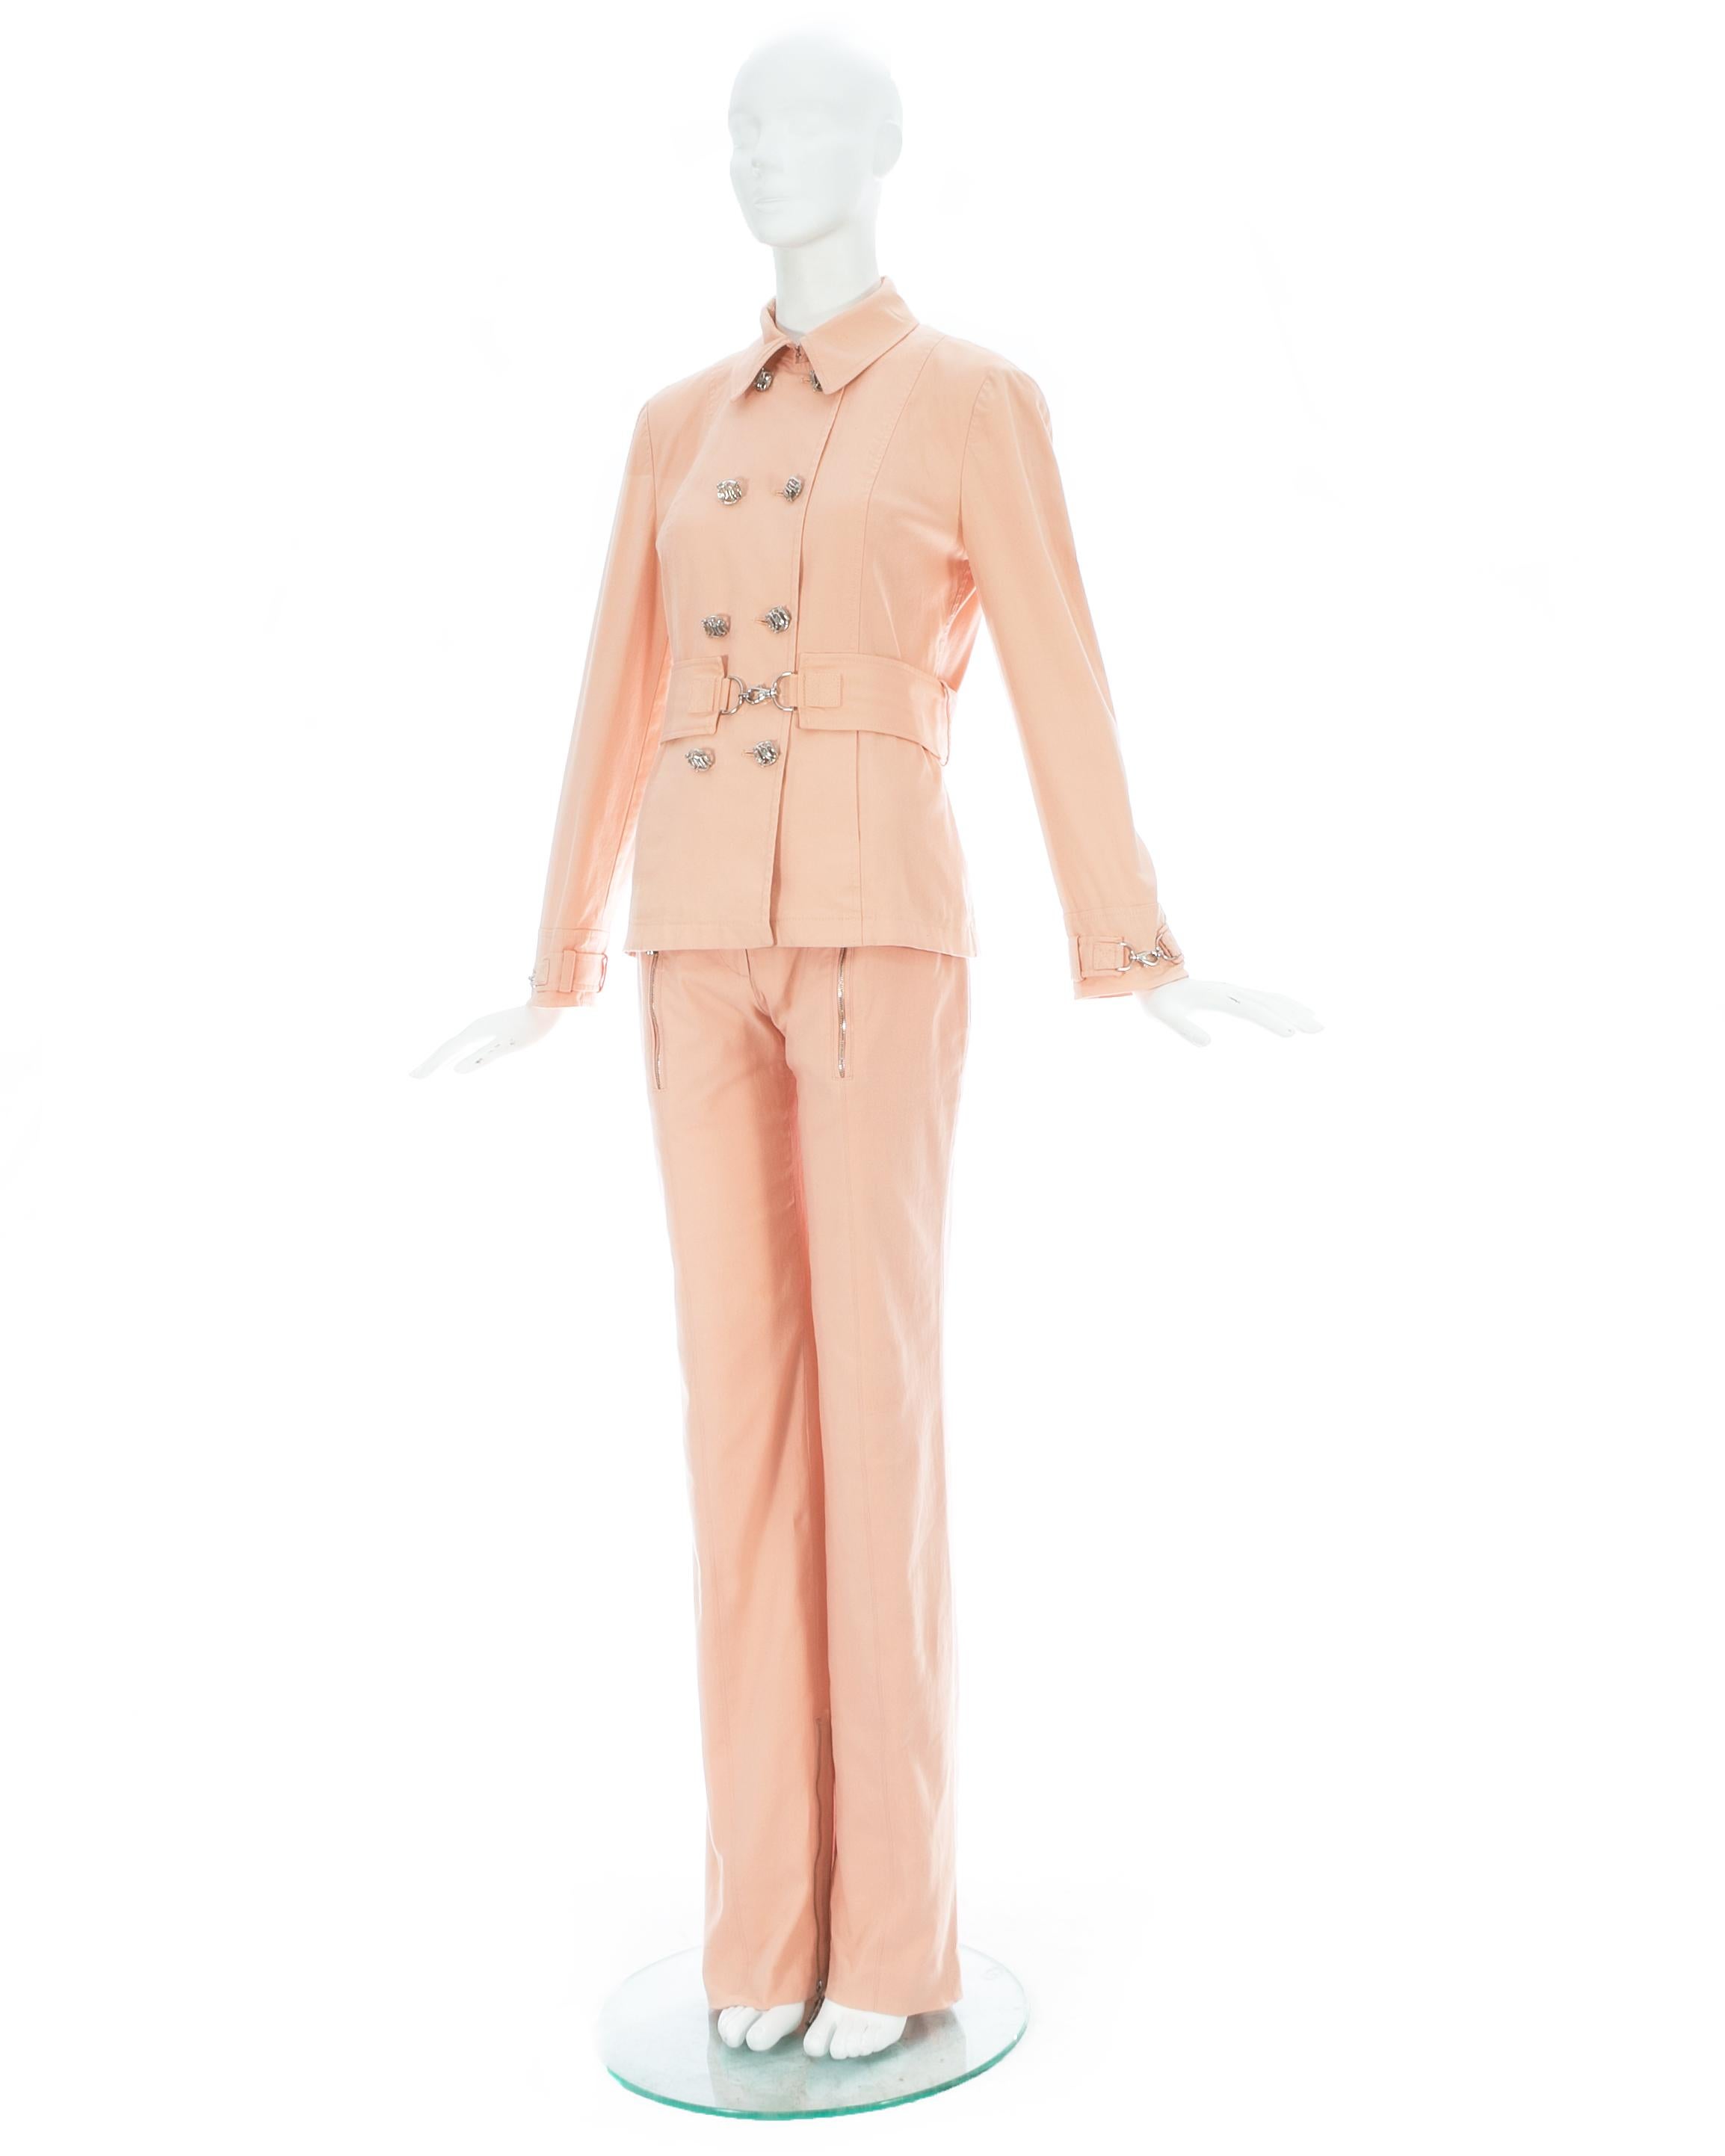 Gianni Versace baby pink cotton pant suit with silver hardware, ss 2003 1